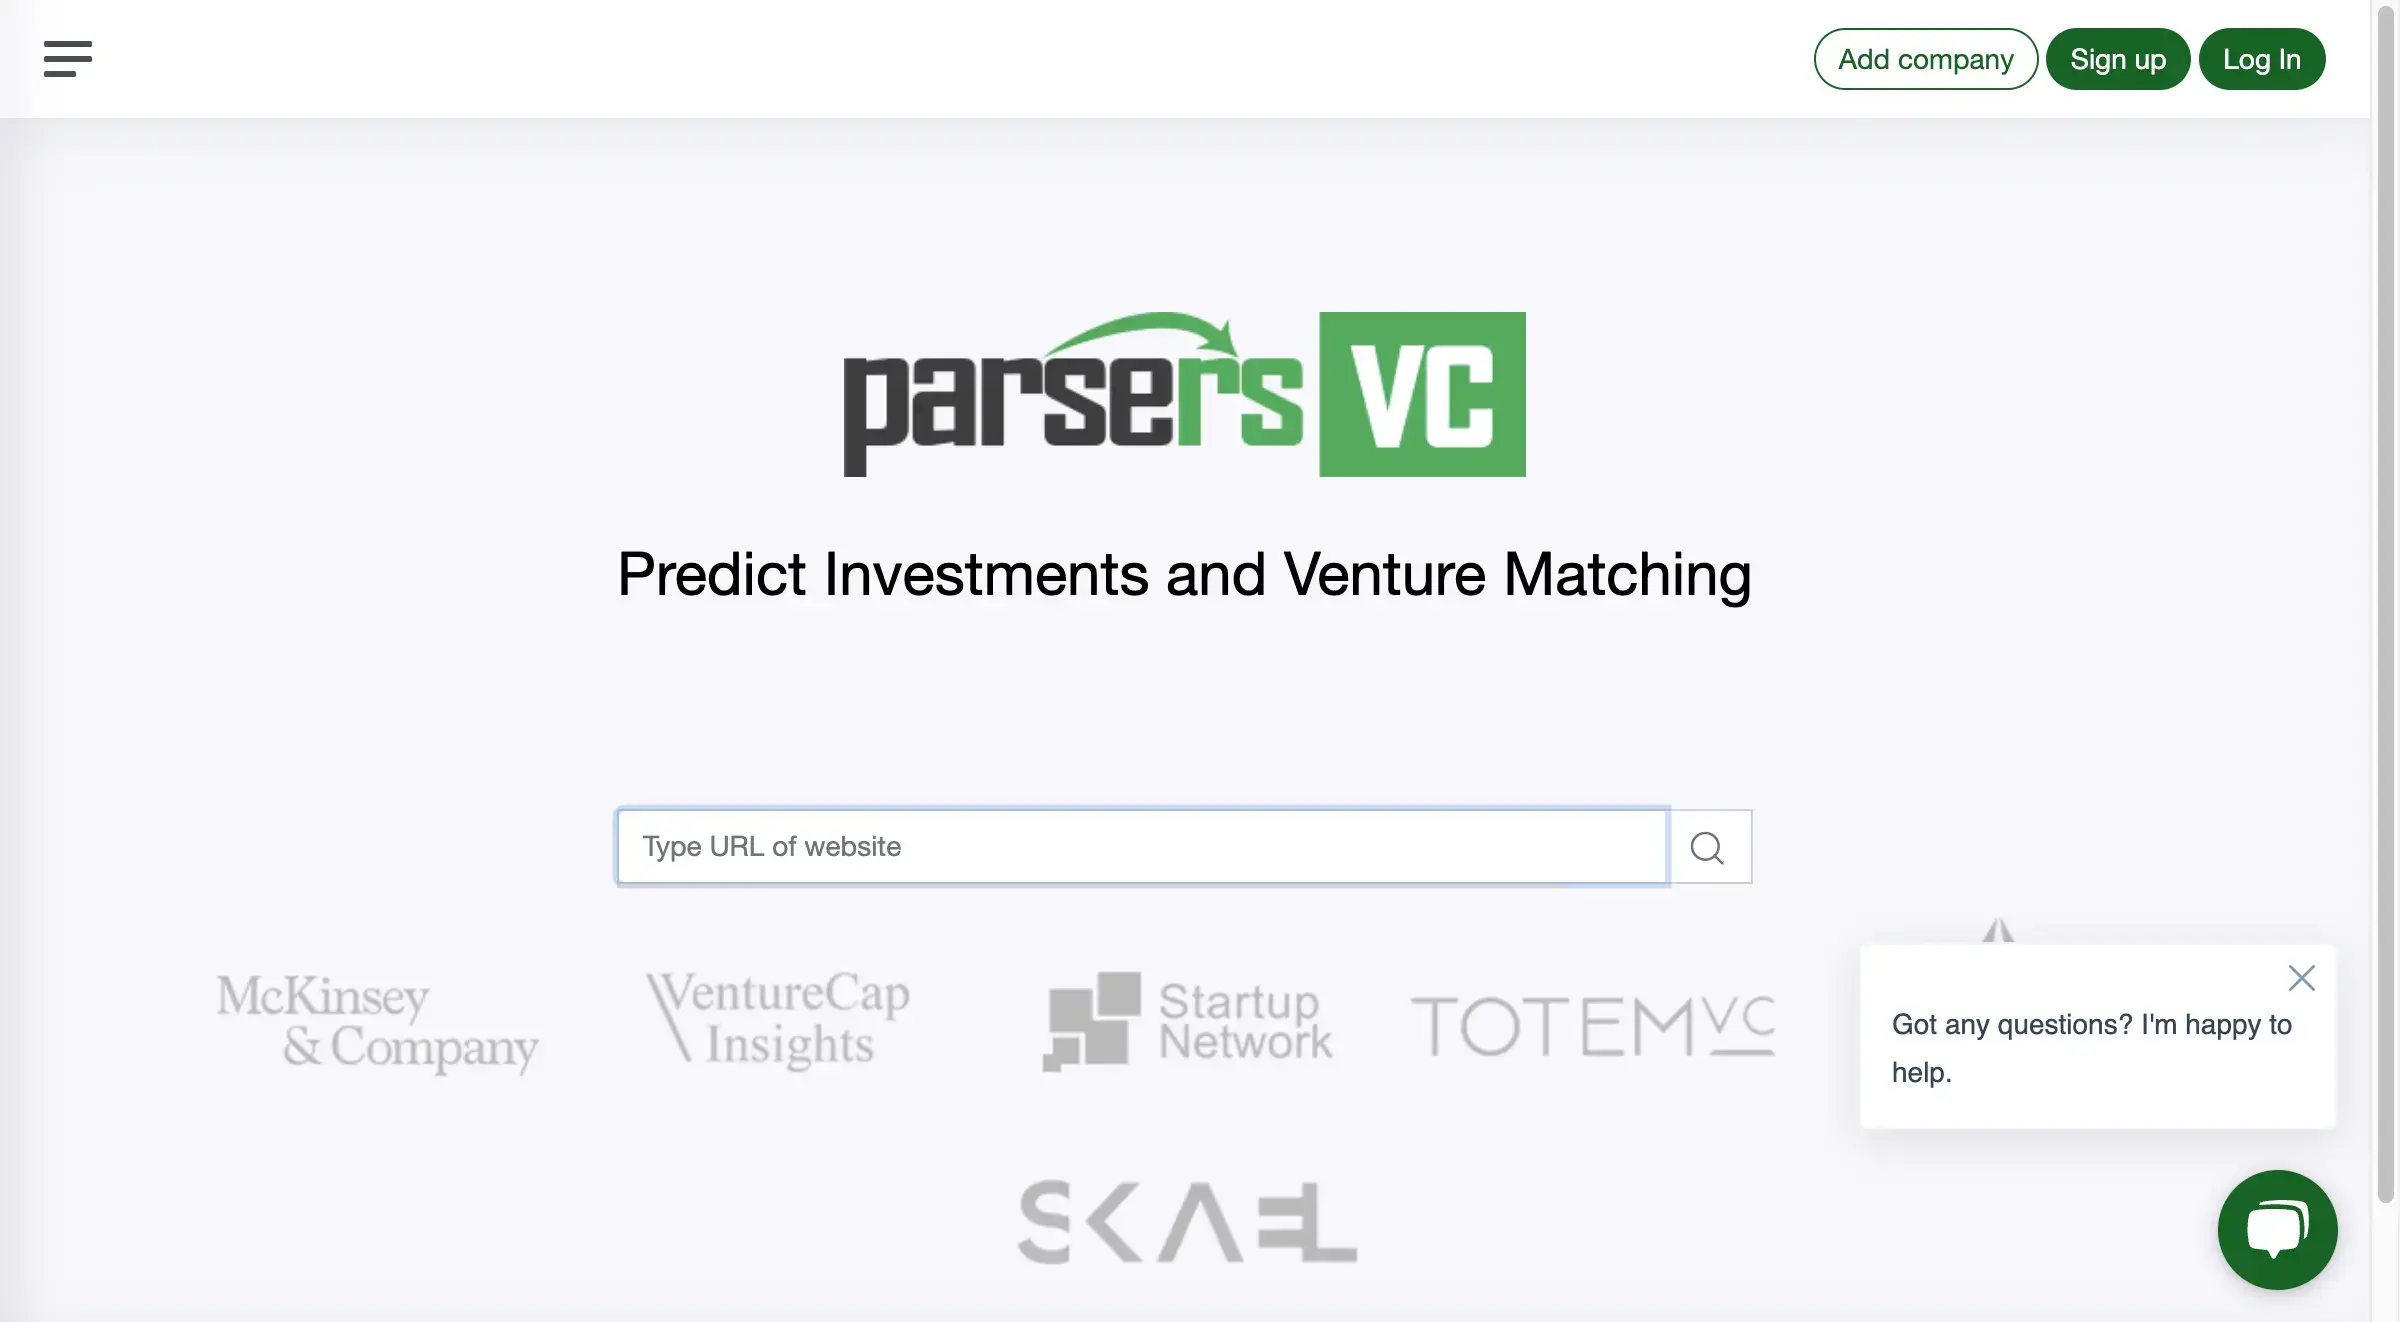 Predict Investments and Venture Matching